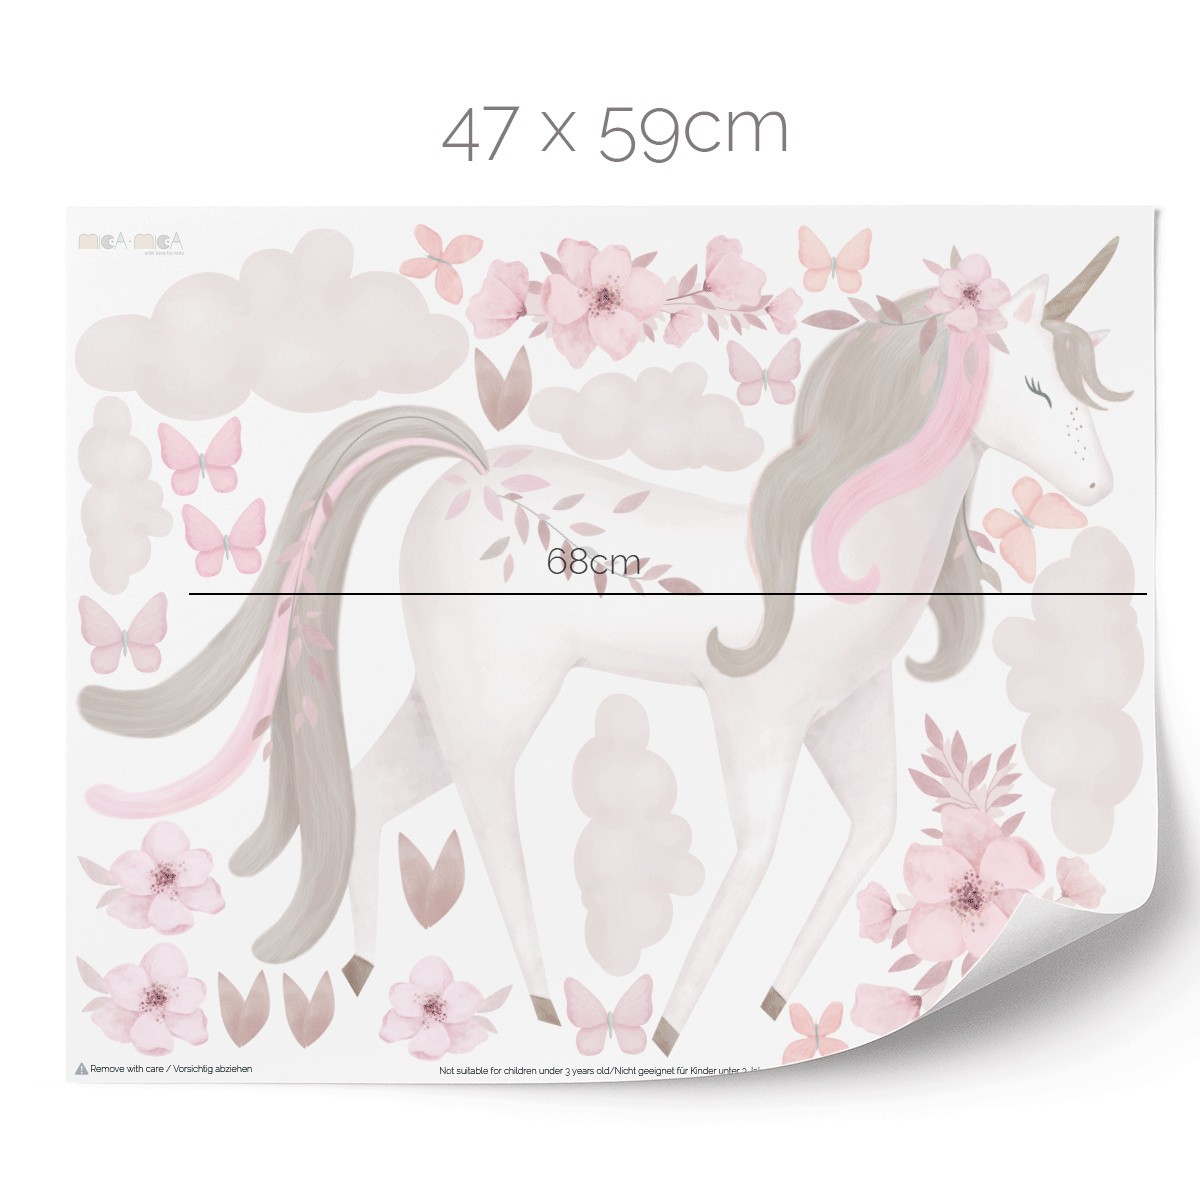 Unicorn wall stickers - Magical unicorn with flowers